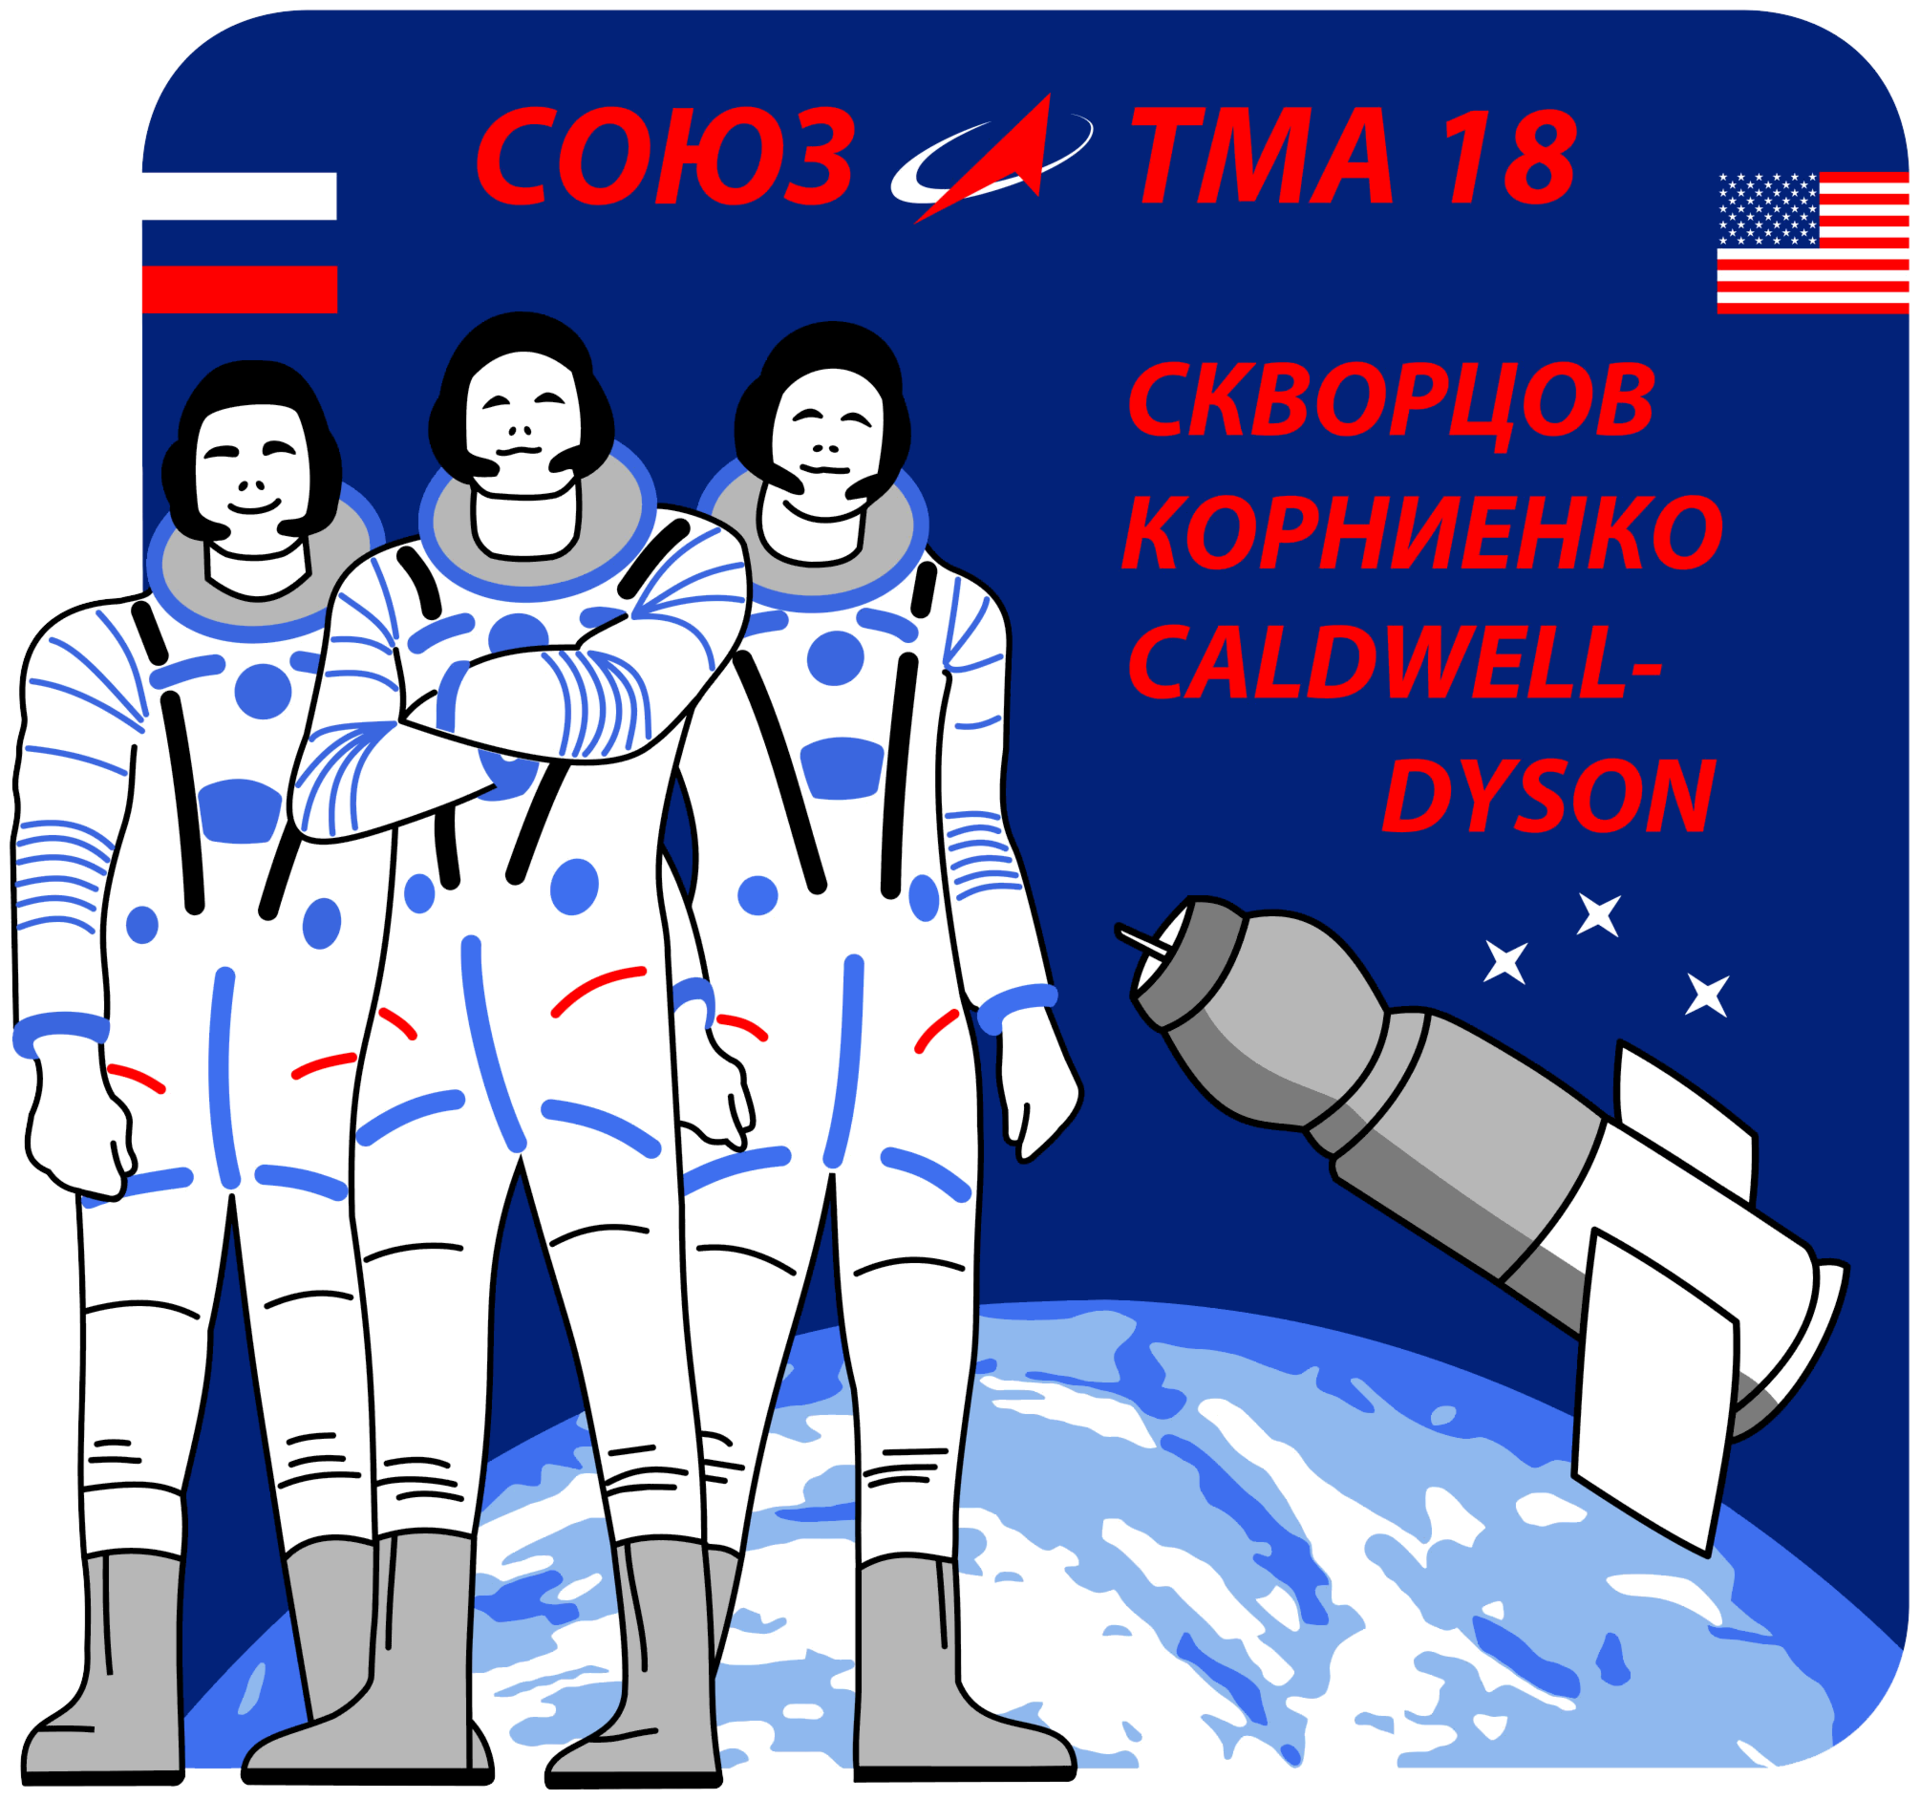 Mission patch for Soyuz TMA-18